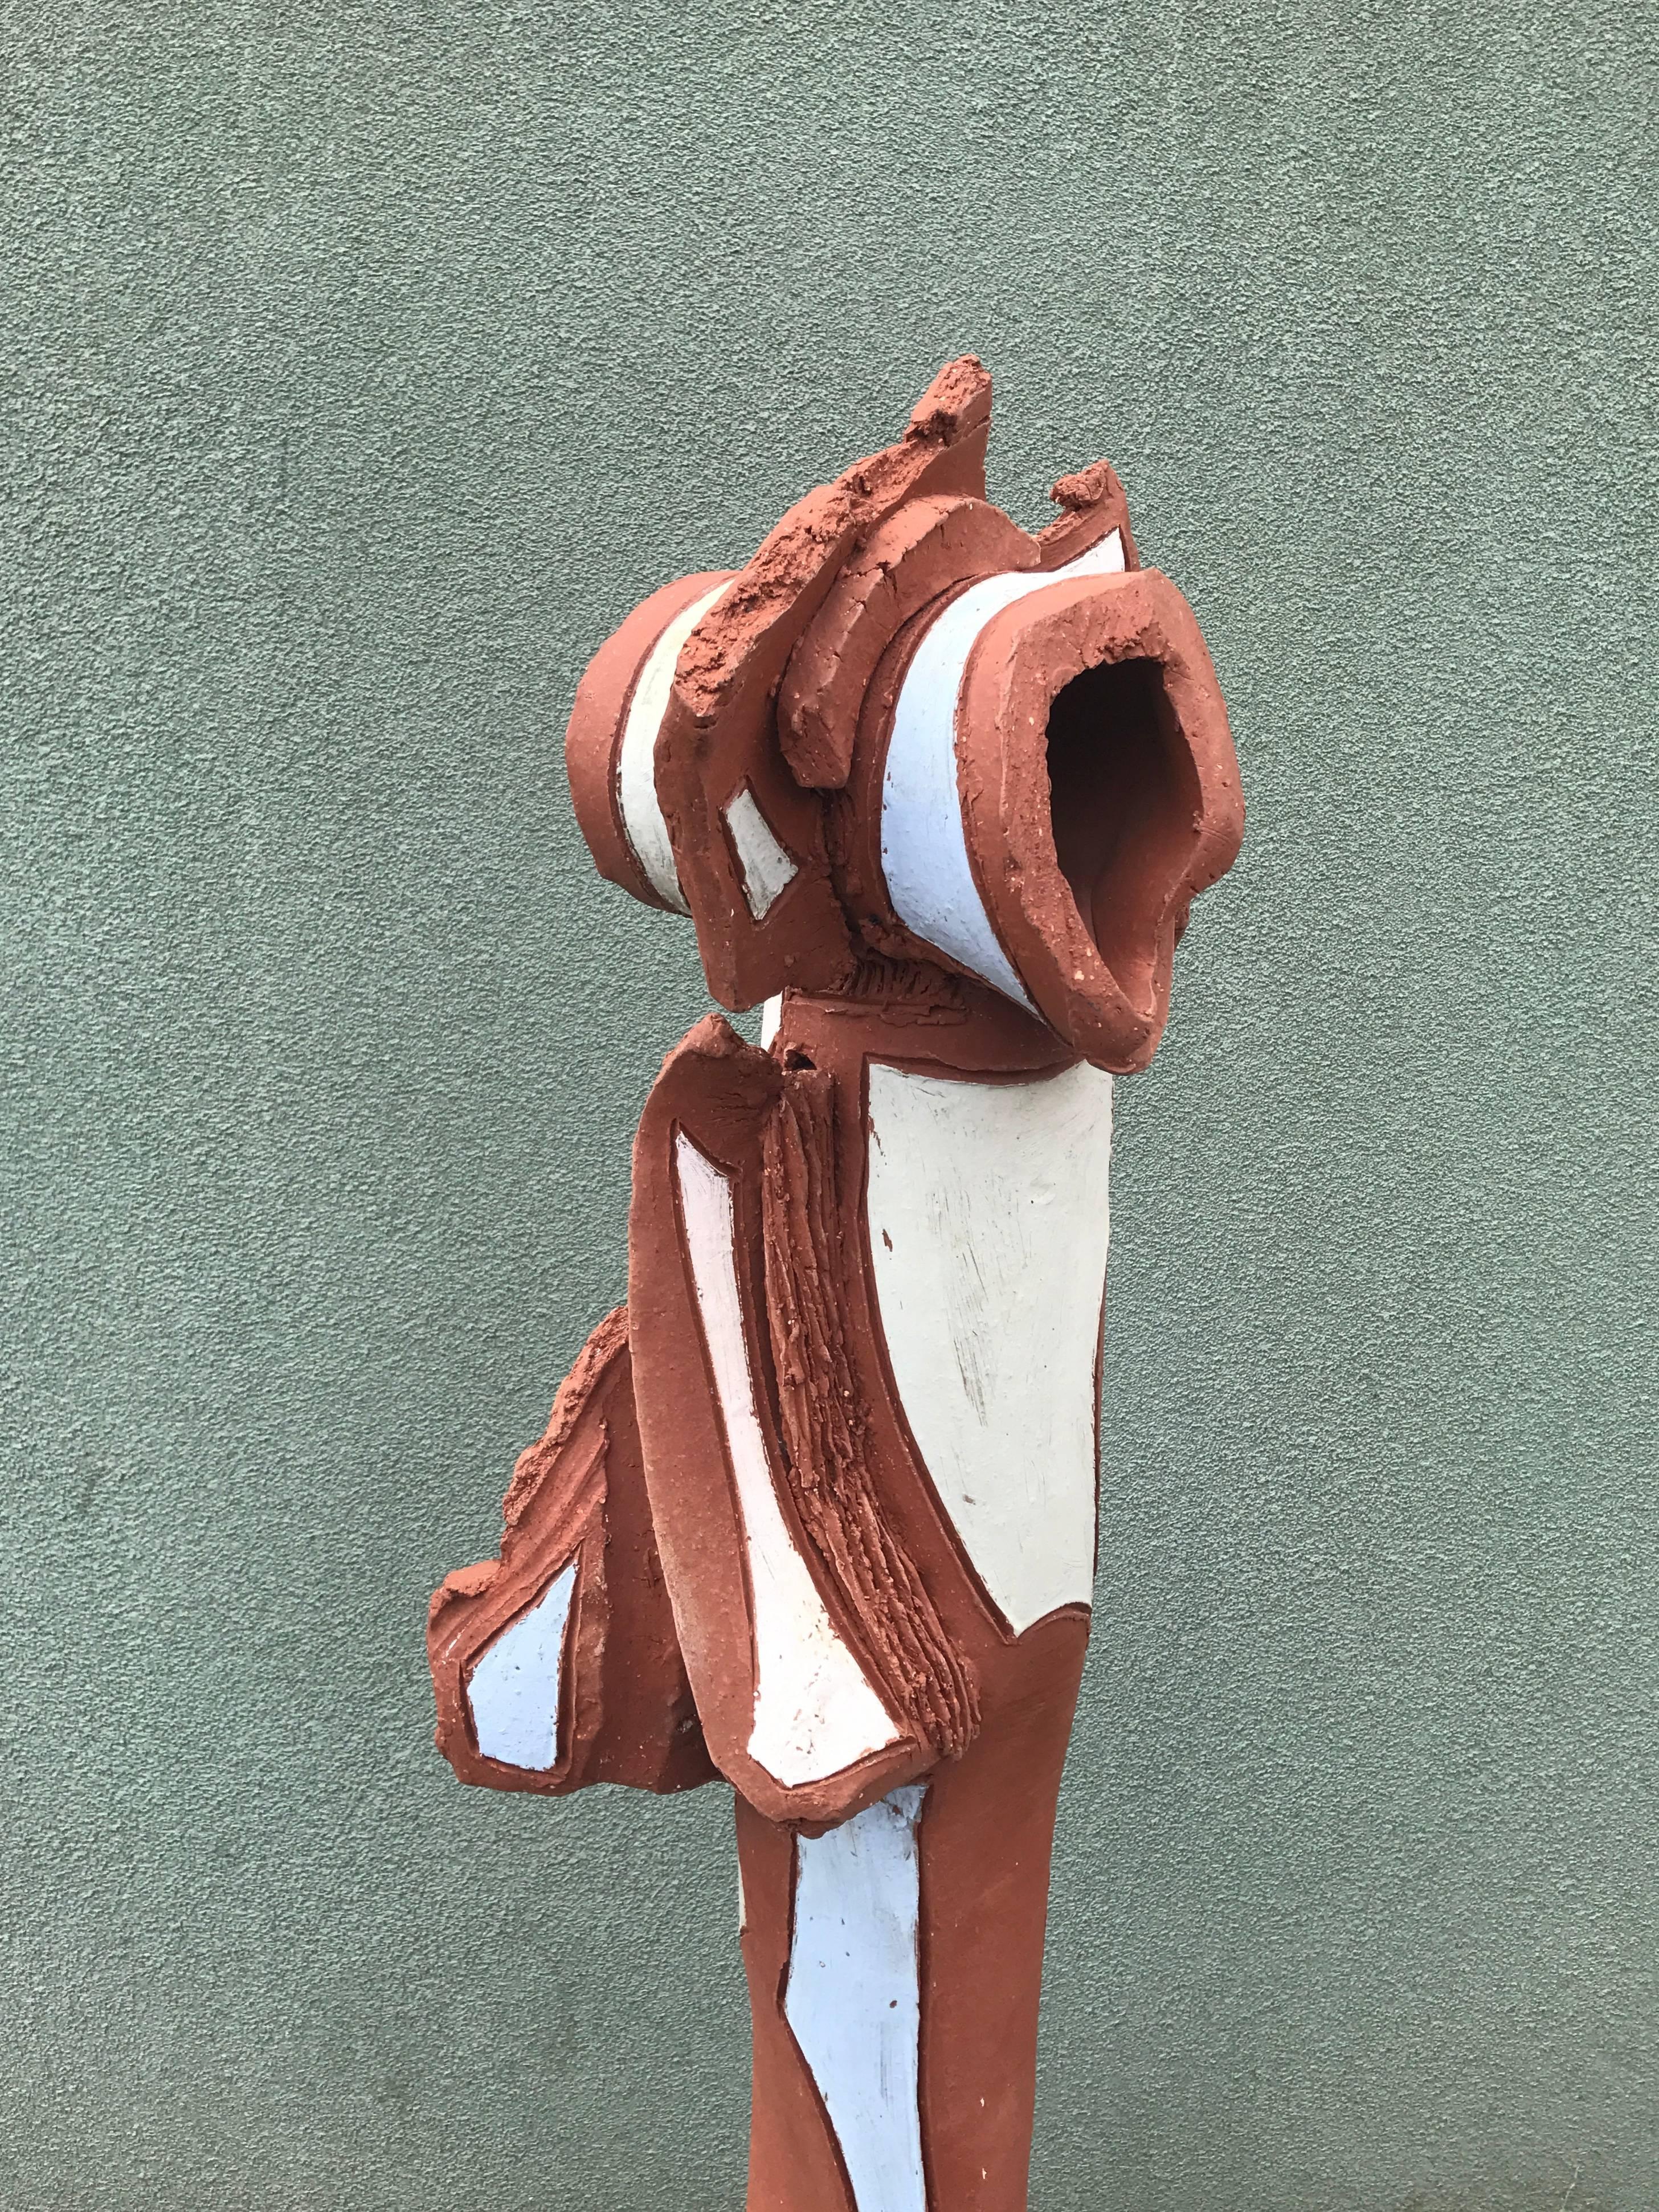 American Bay Area Large Glazed Ceramic Abstract or Brutalist TOTEM Sculpture #2 For Sale